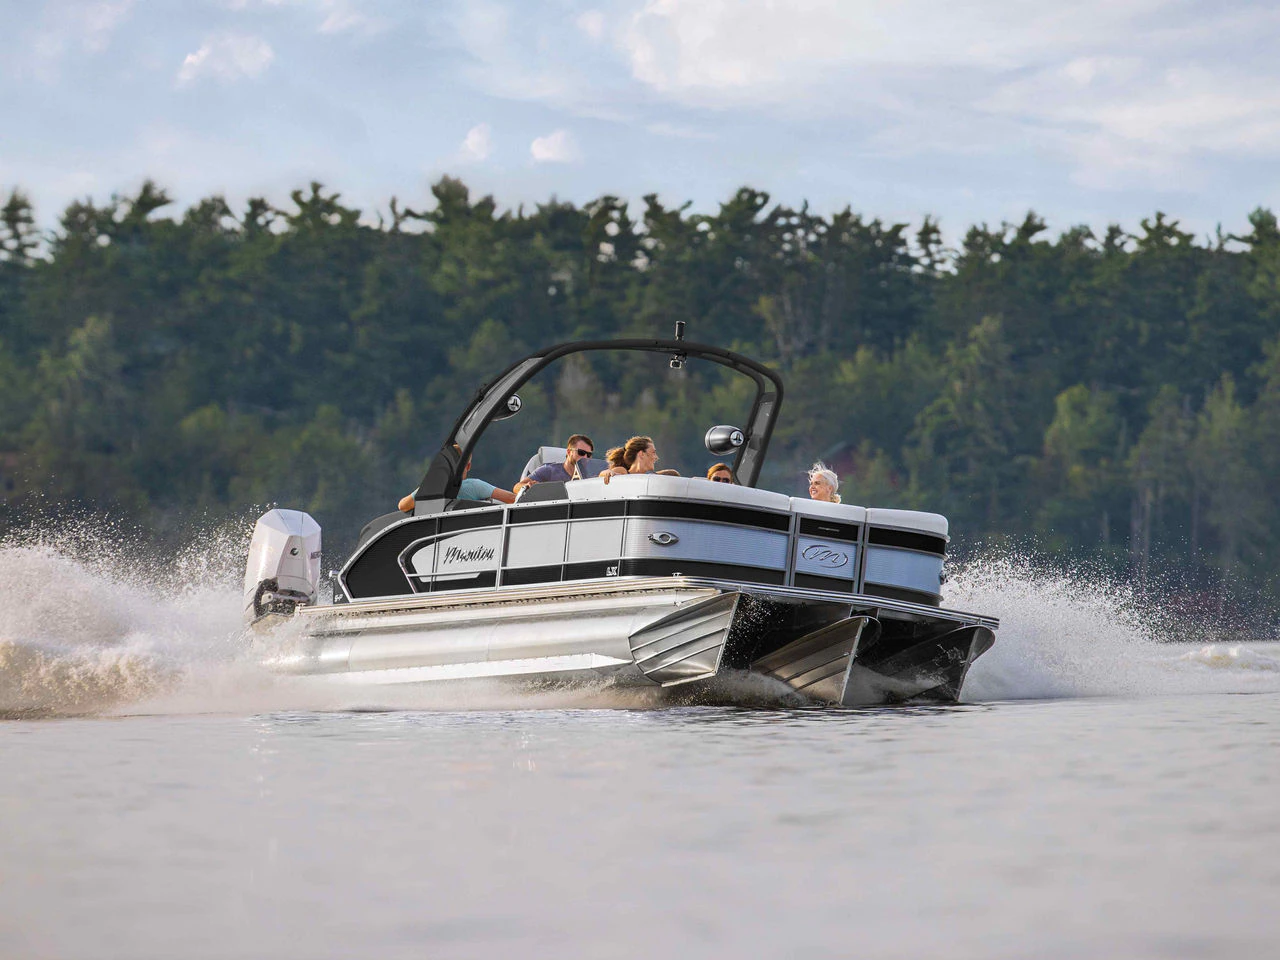 Largest Pontoon Boat Inventory. 3 Brands To Choose From